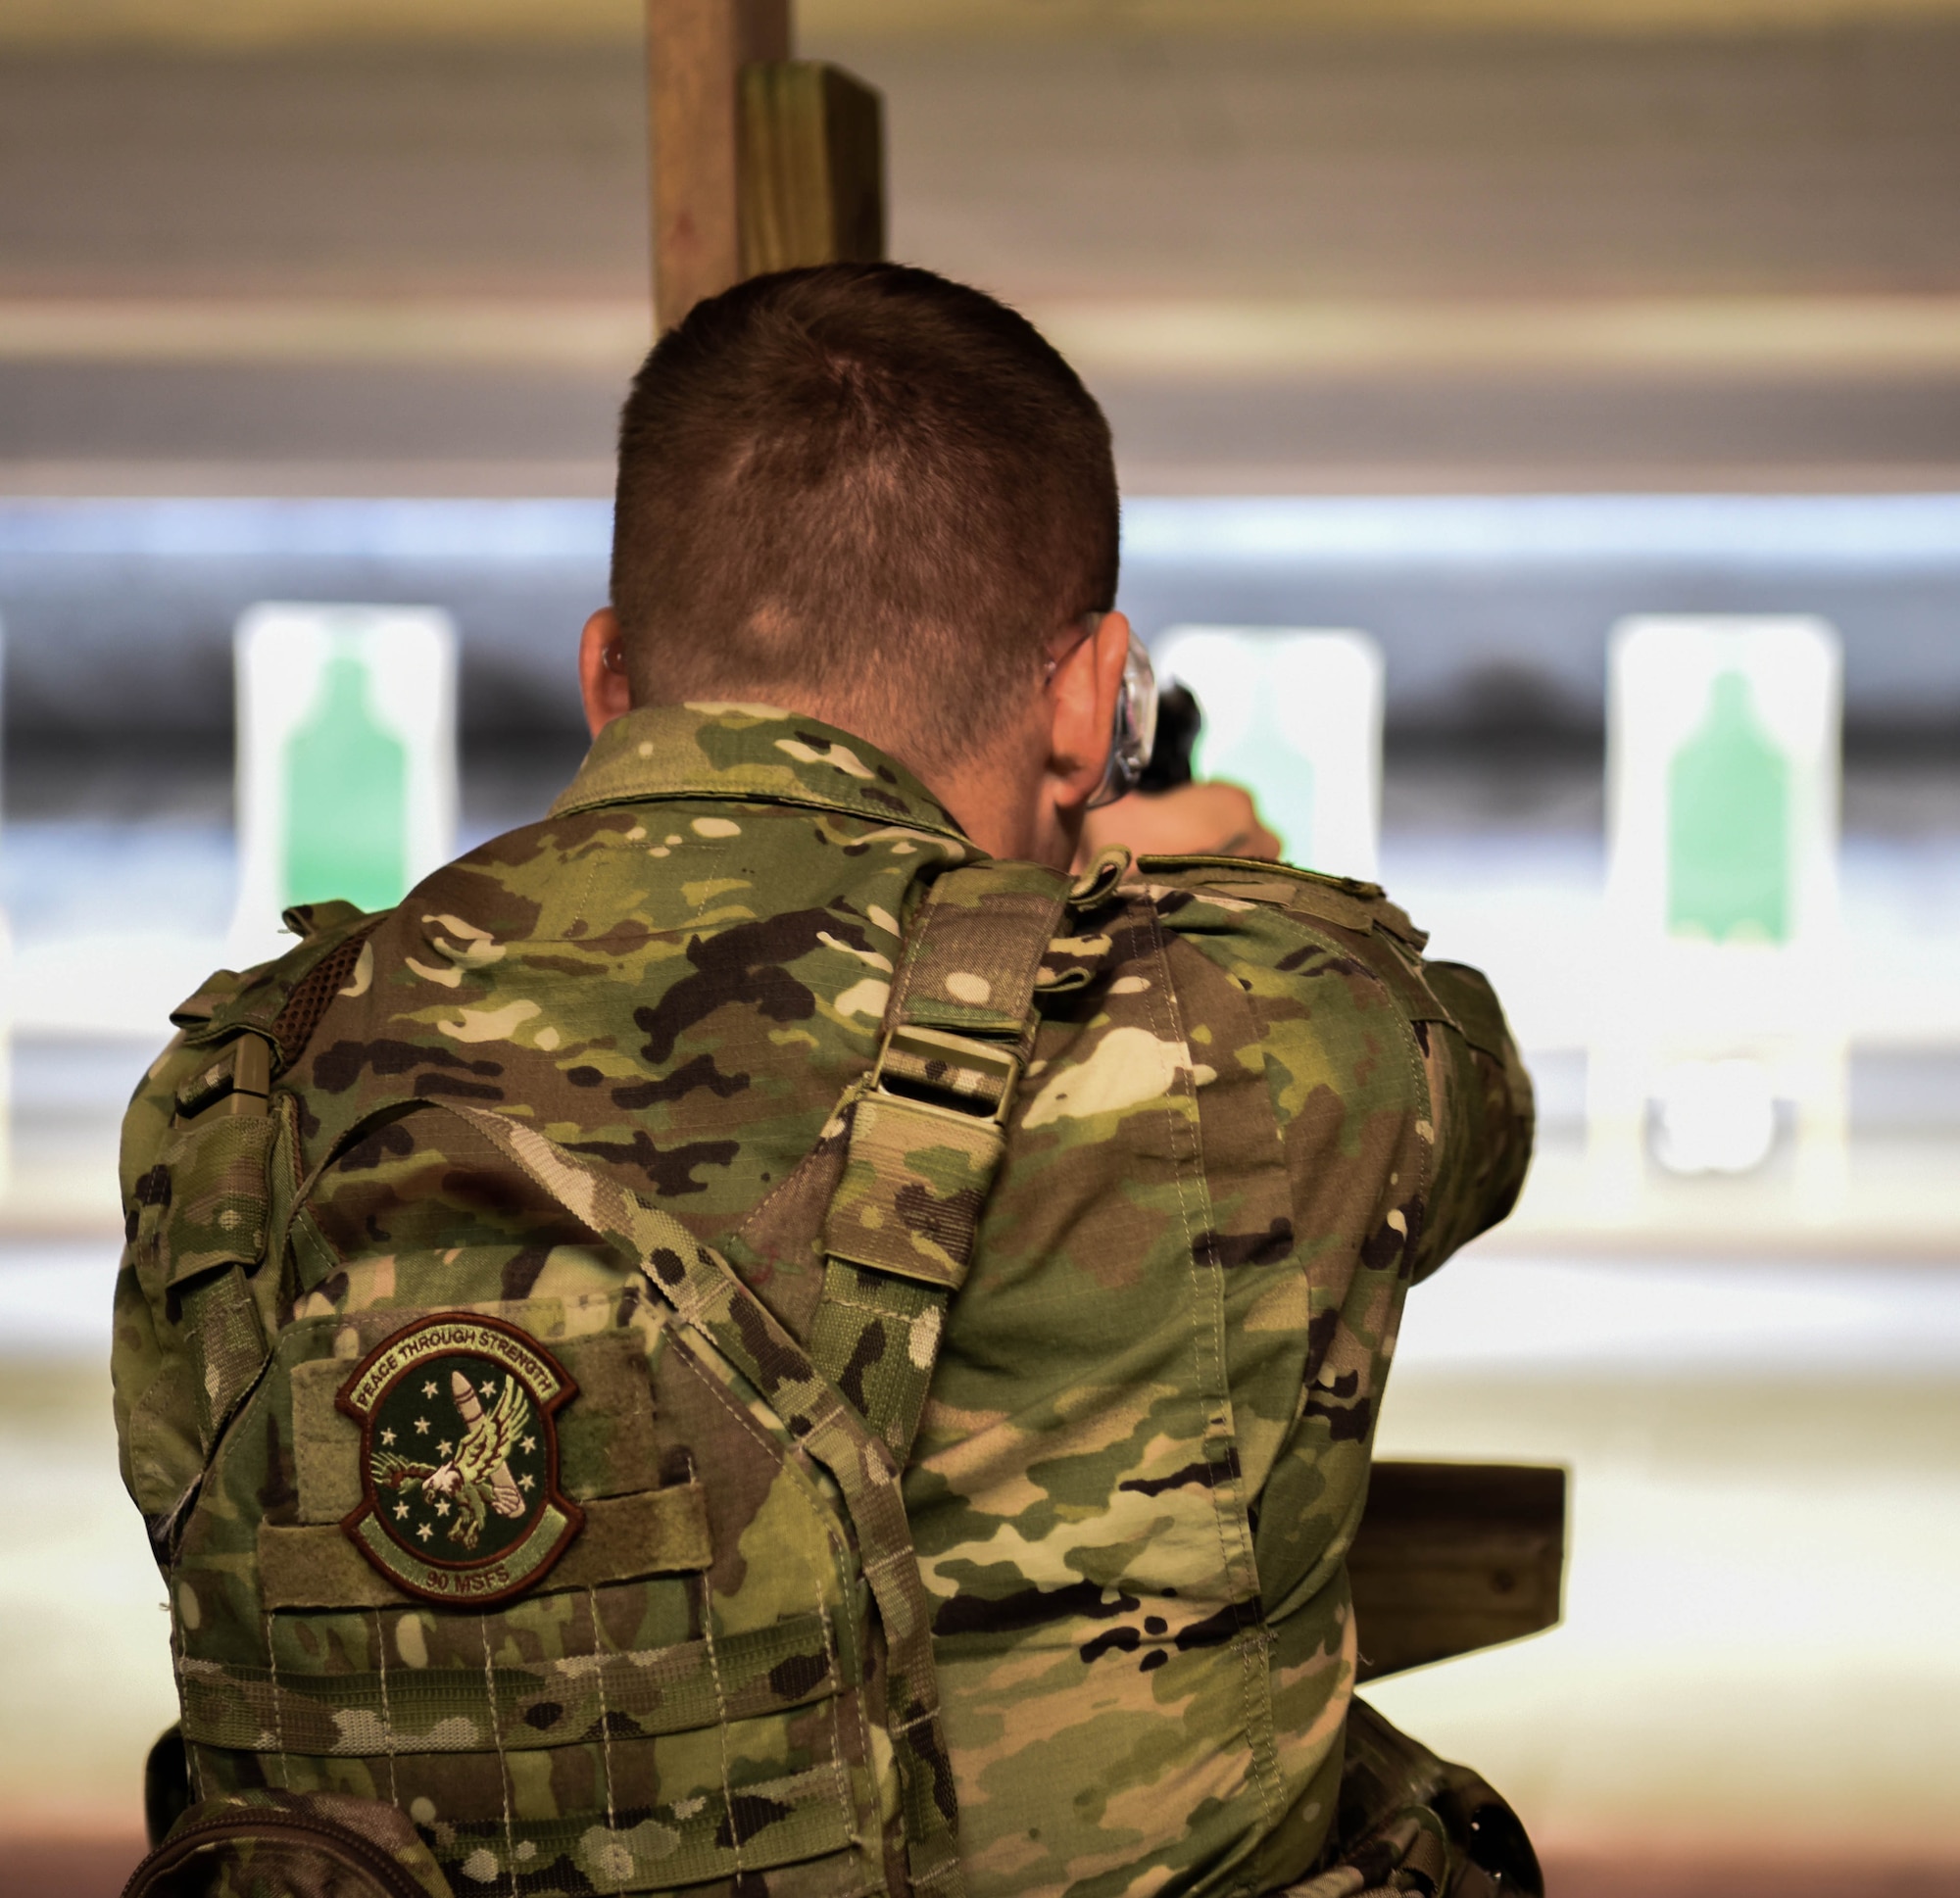 2nd Lt. Mark Stacy, 90th Missile Security Forces Squadron flight commander, aims down the sights of an M-9 Berretta March 23, 2018, at the Combat Arms Training and Maintenance range on F.E. Warren Air Force Base Wyo. On top of teaching and qualifying non security Airmen, CATM also helps missile security forces and base security forces personnel requalify on the weapons they use in their everyday job. Combat Arms Training and Maintenance is a vital component to keeping our Airmen trained and qualified on the weapon systems they are issued when performing security on home station or deployed. (U.S. Air Force photo by Airman 1st Class Braydon Williams)